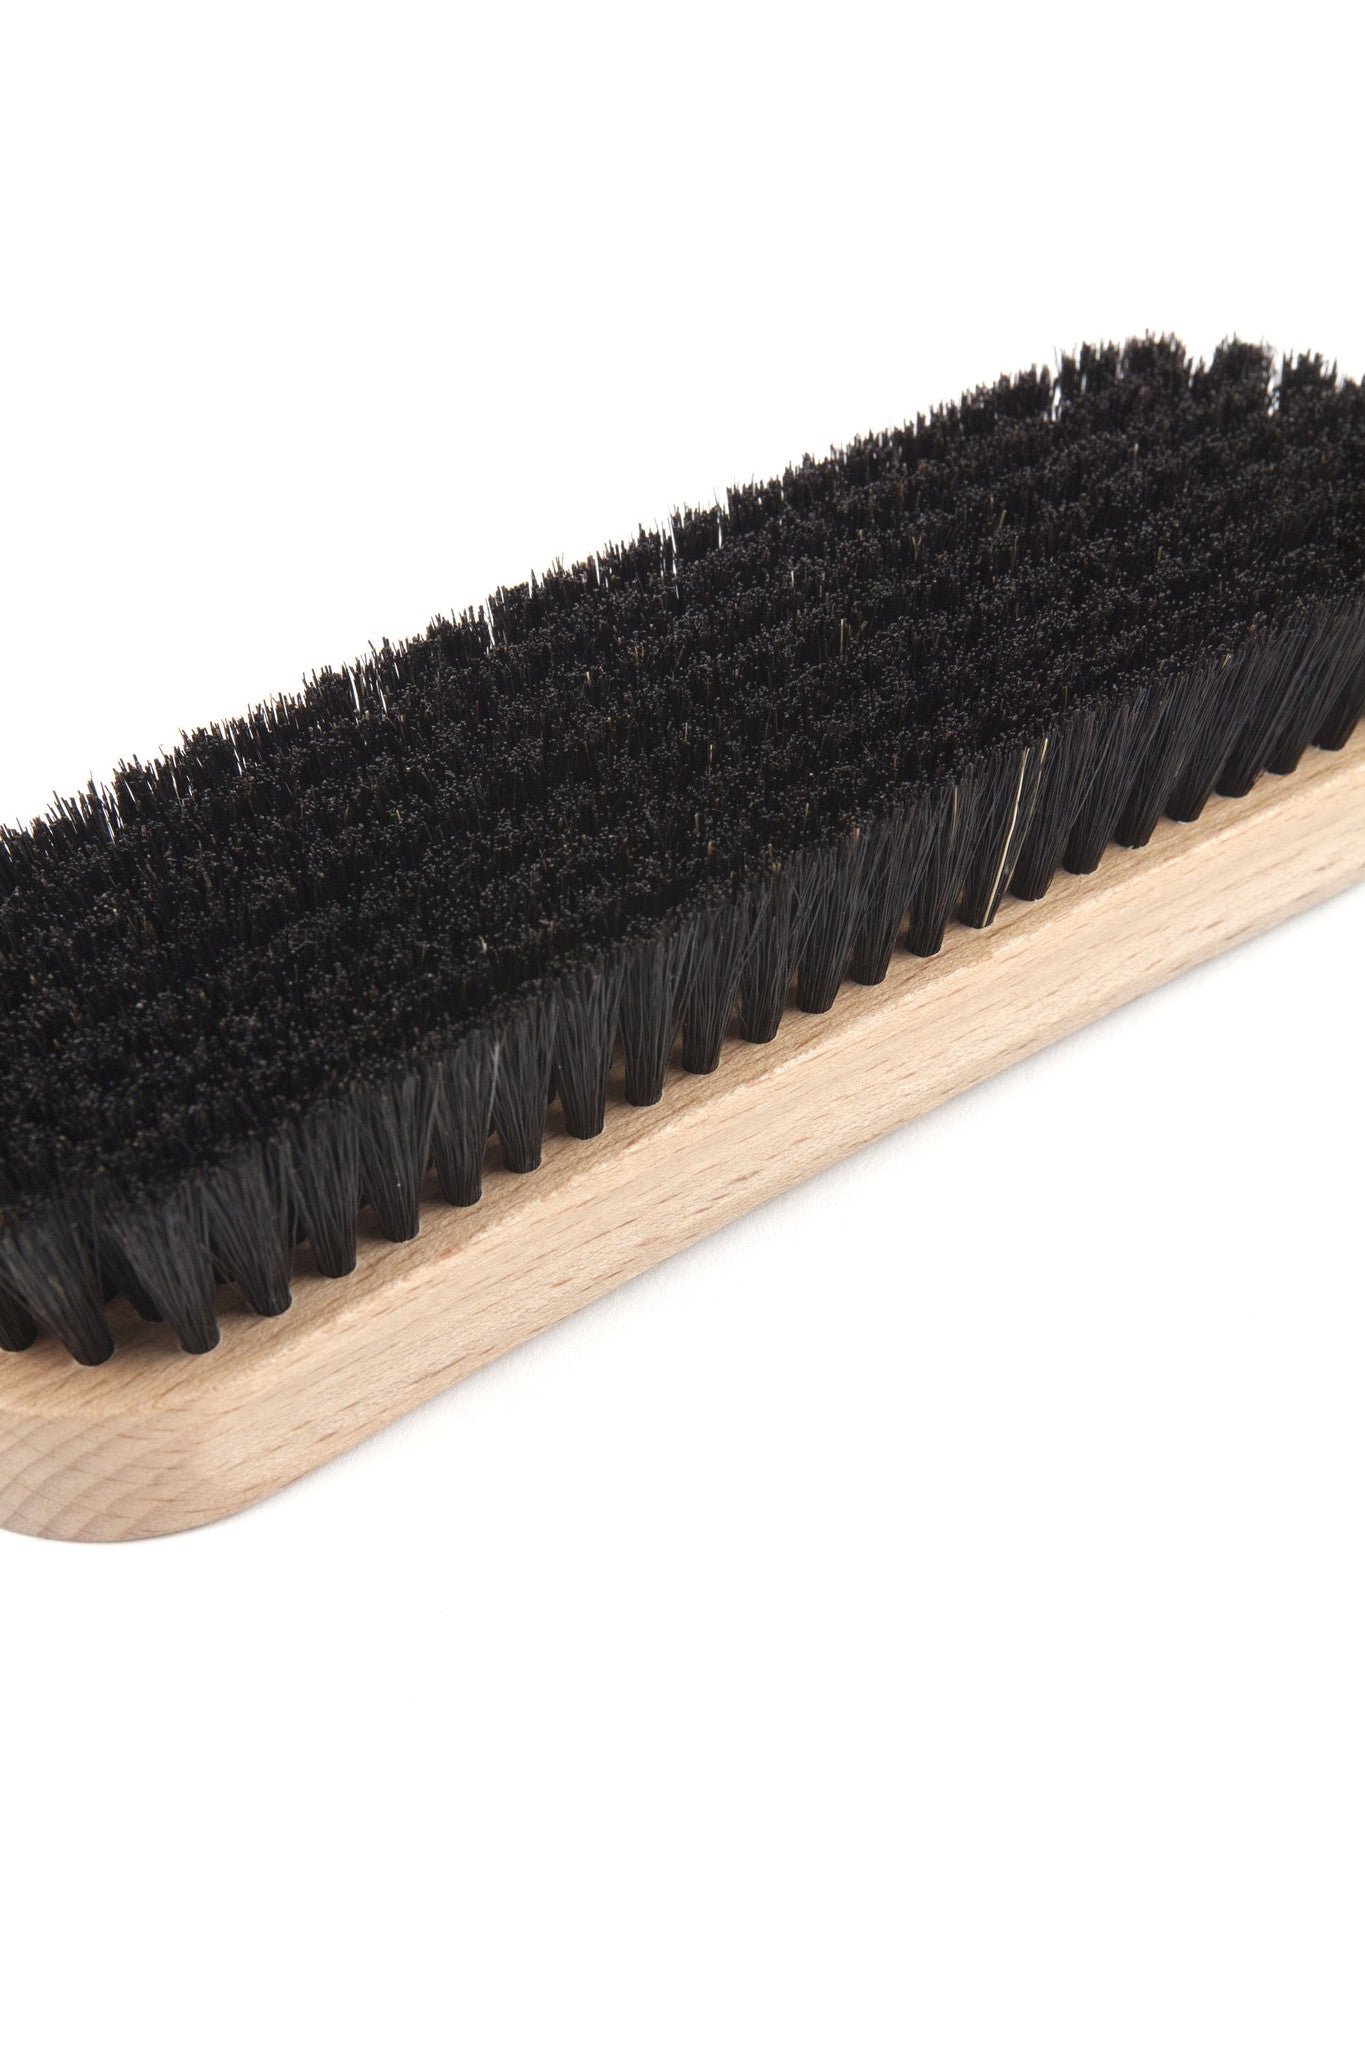 Andrée Jardin Tradition Clothing Brush - Utilities - Andrée Jardin - Andrée Jardin - Brand_Andrée Jardin - Home_Broom Sets - Home_Household Cleaning - Shoe & Textile Brushes - 5300-1712_Clothing_Brush_E